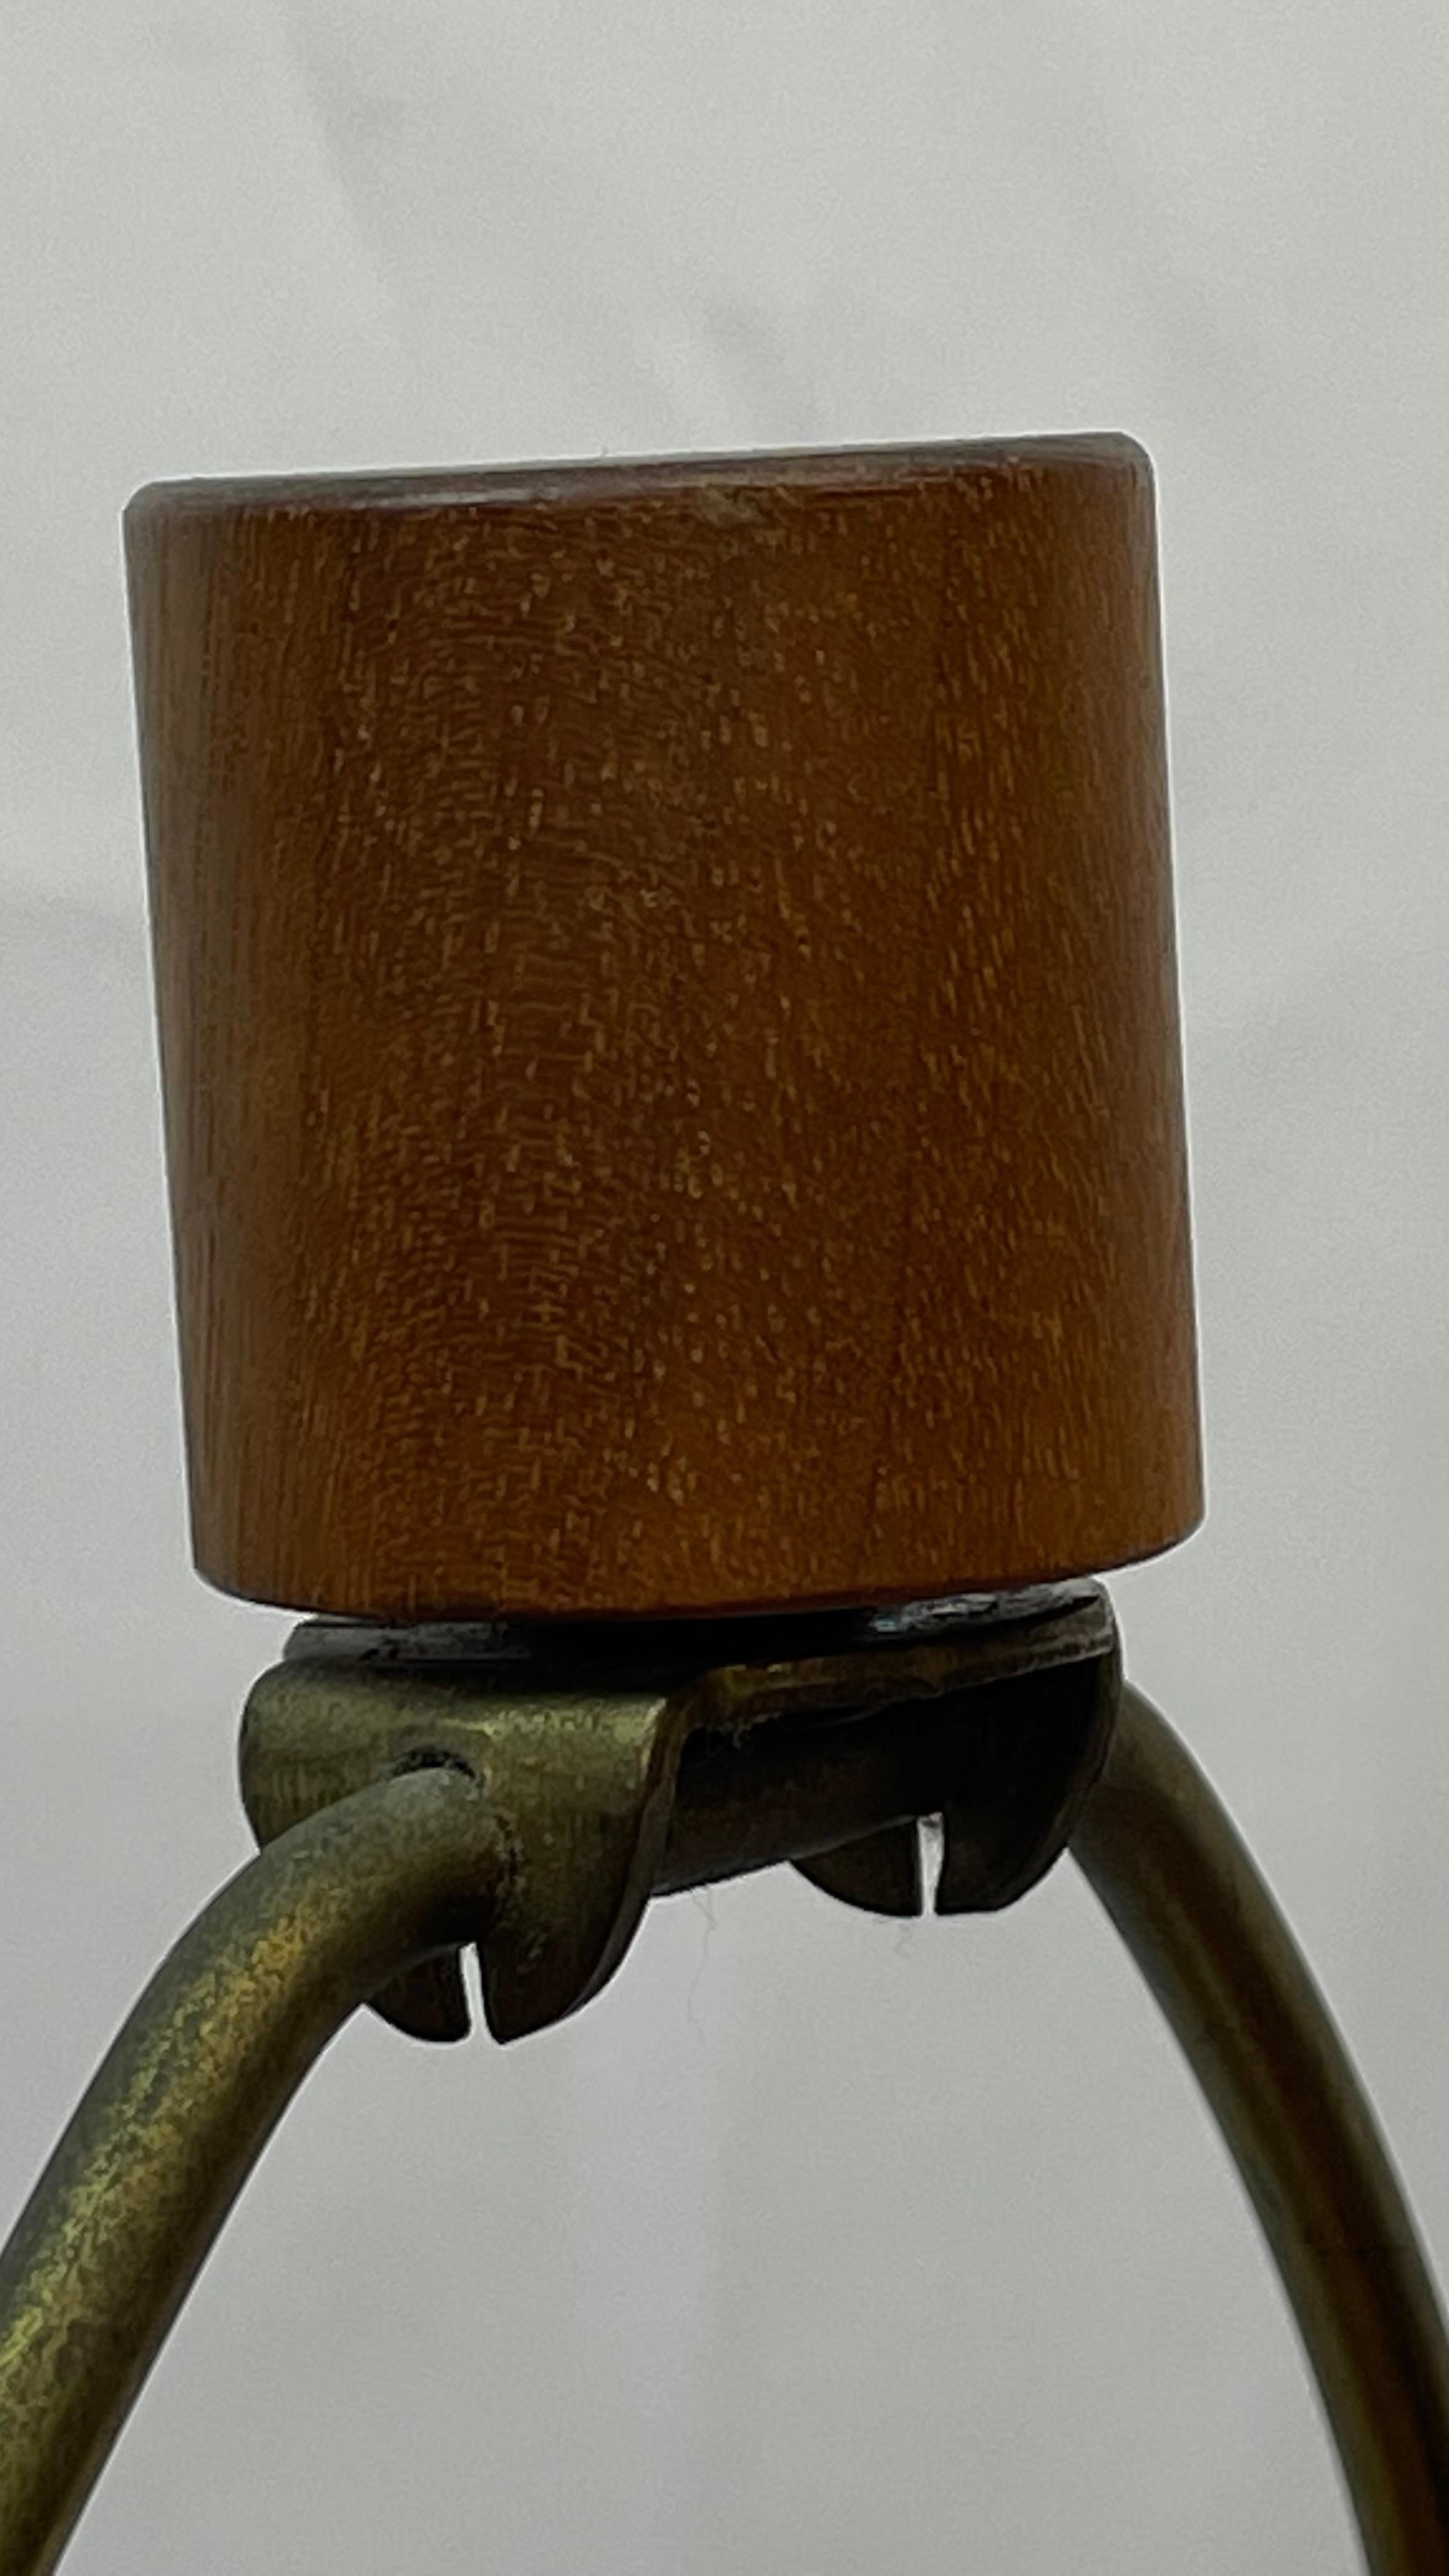 Martz Ceramic Table Lamp w/Brown Swirl Design and Wood Finial For Sale 1